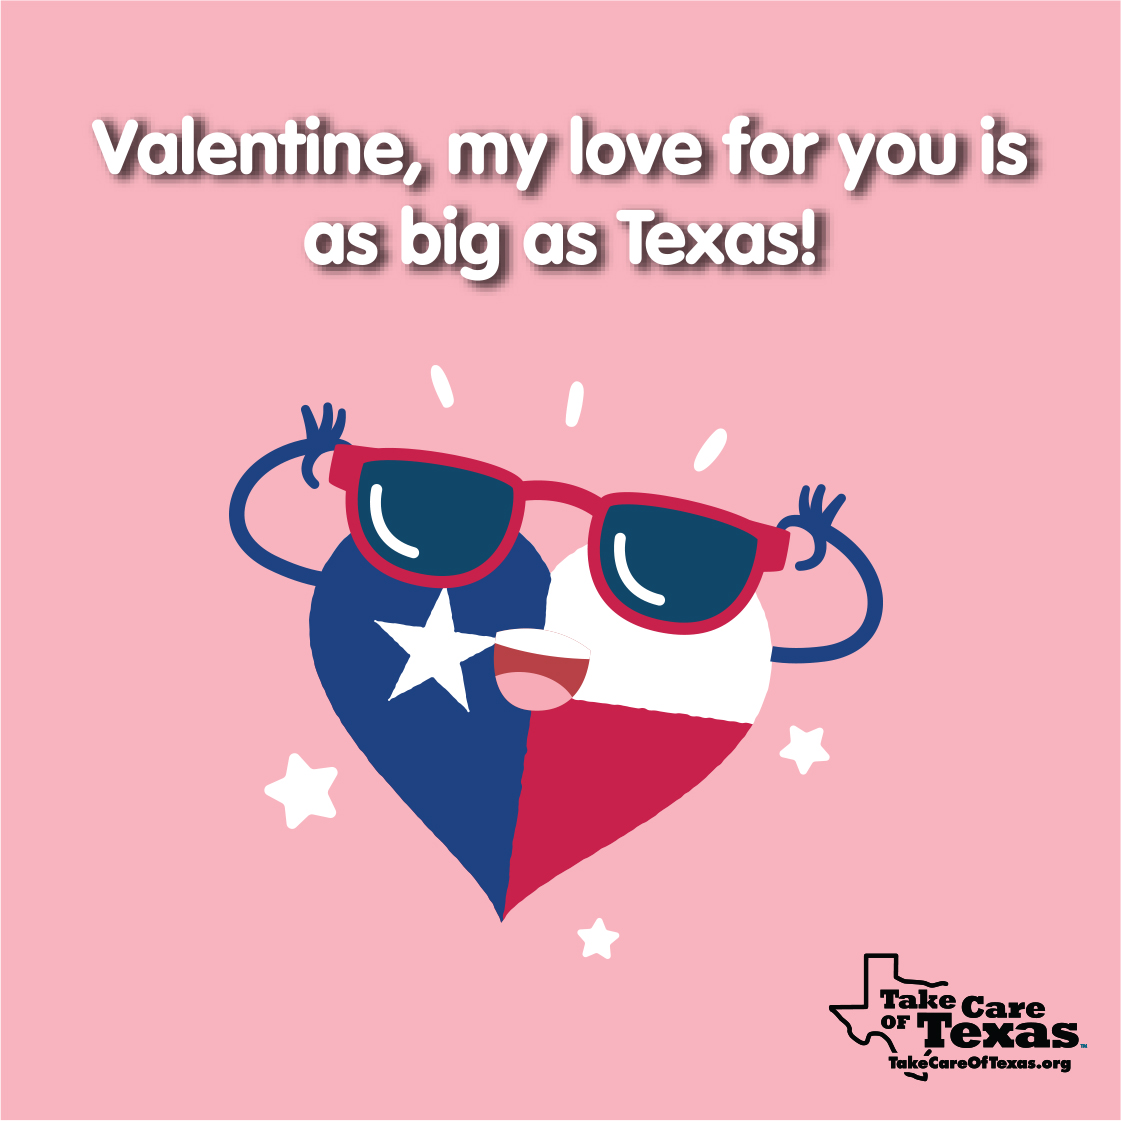 A Texas-colored heart with the text "Valentine, my love for you is as big as Texas!"